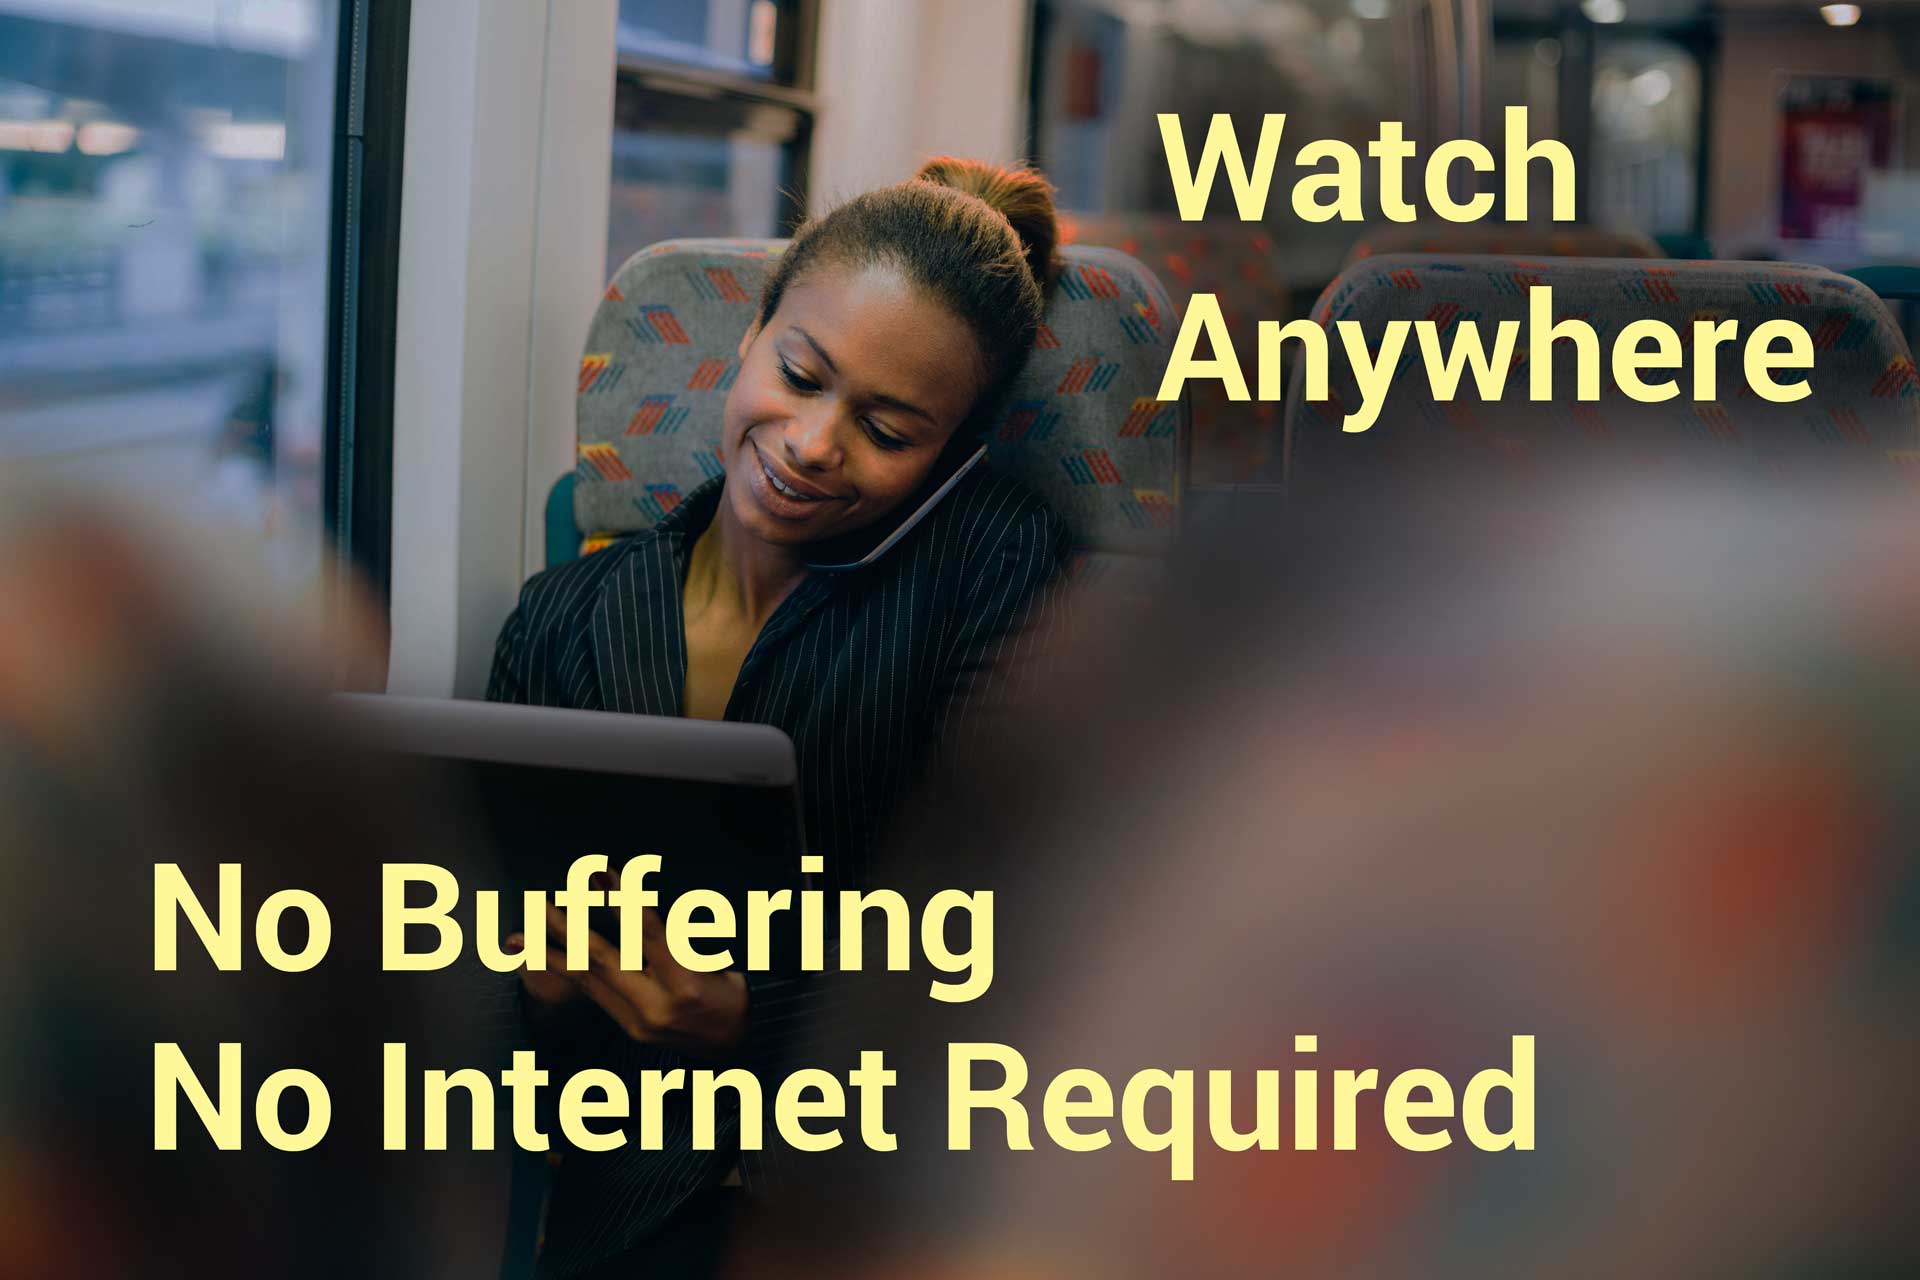 Watch anywhere. No internet connection required